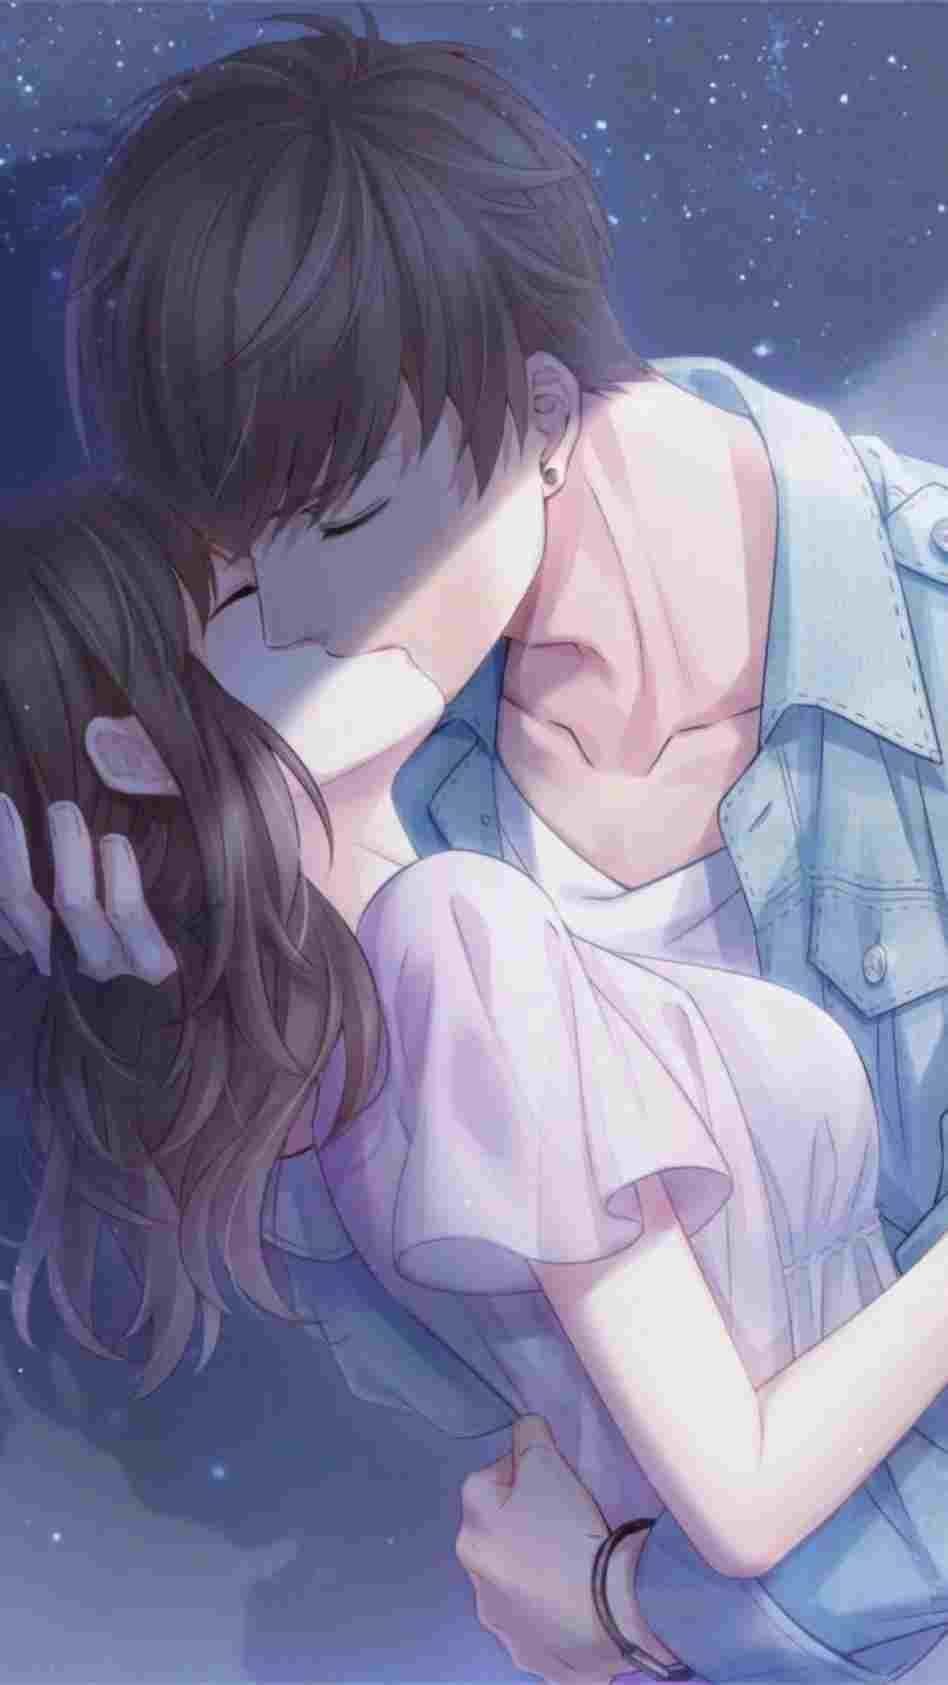 Download Anime Couple Kiss Blue Haired Wallpaper | Wallpapers.com